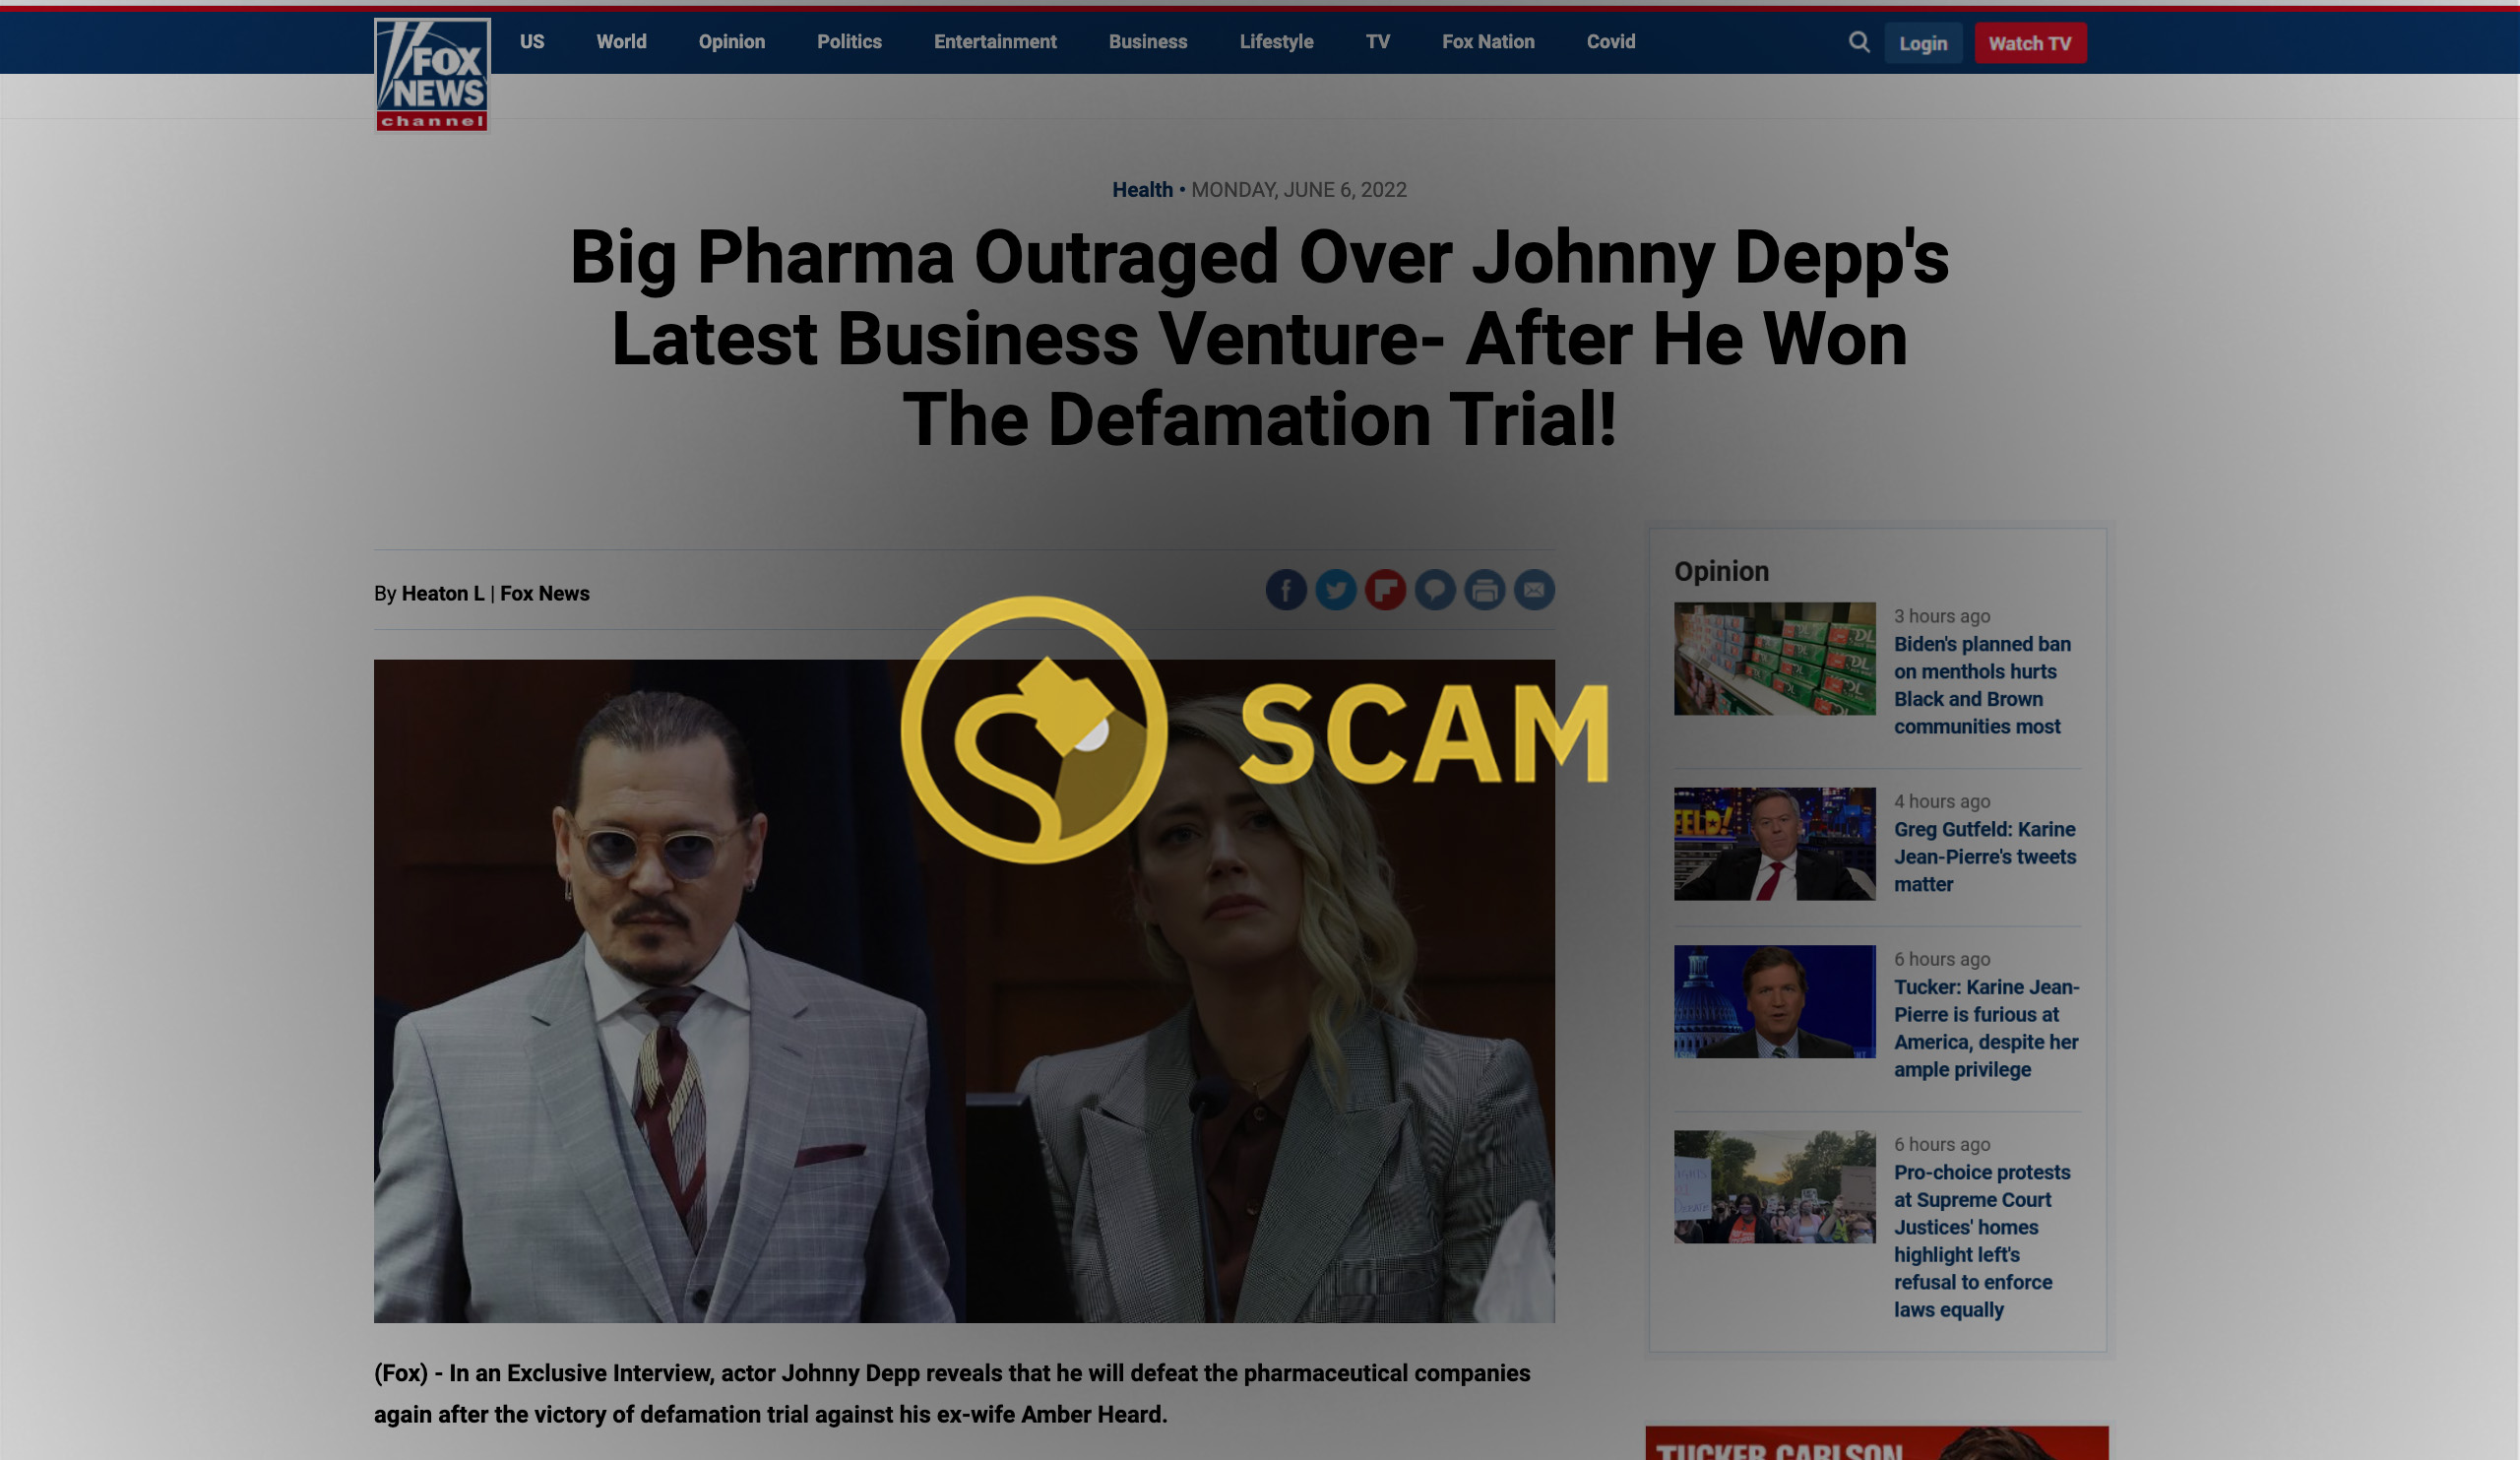 Actor Johnny Depp did not "confirm the latest claims out of court," nor did he ever endorse any CBD gummies products.